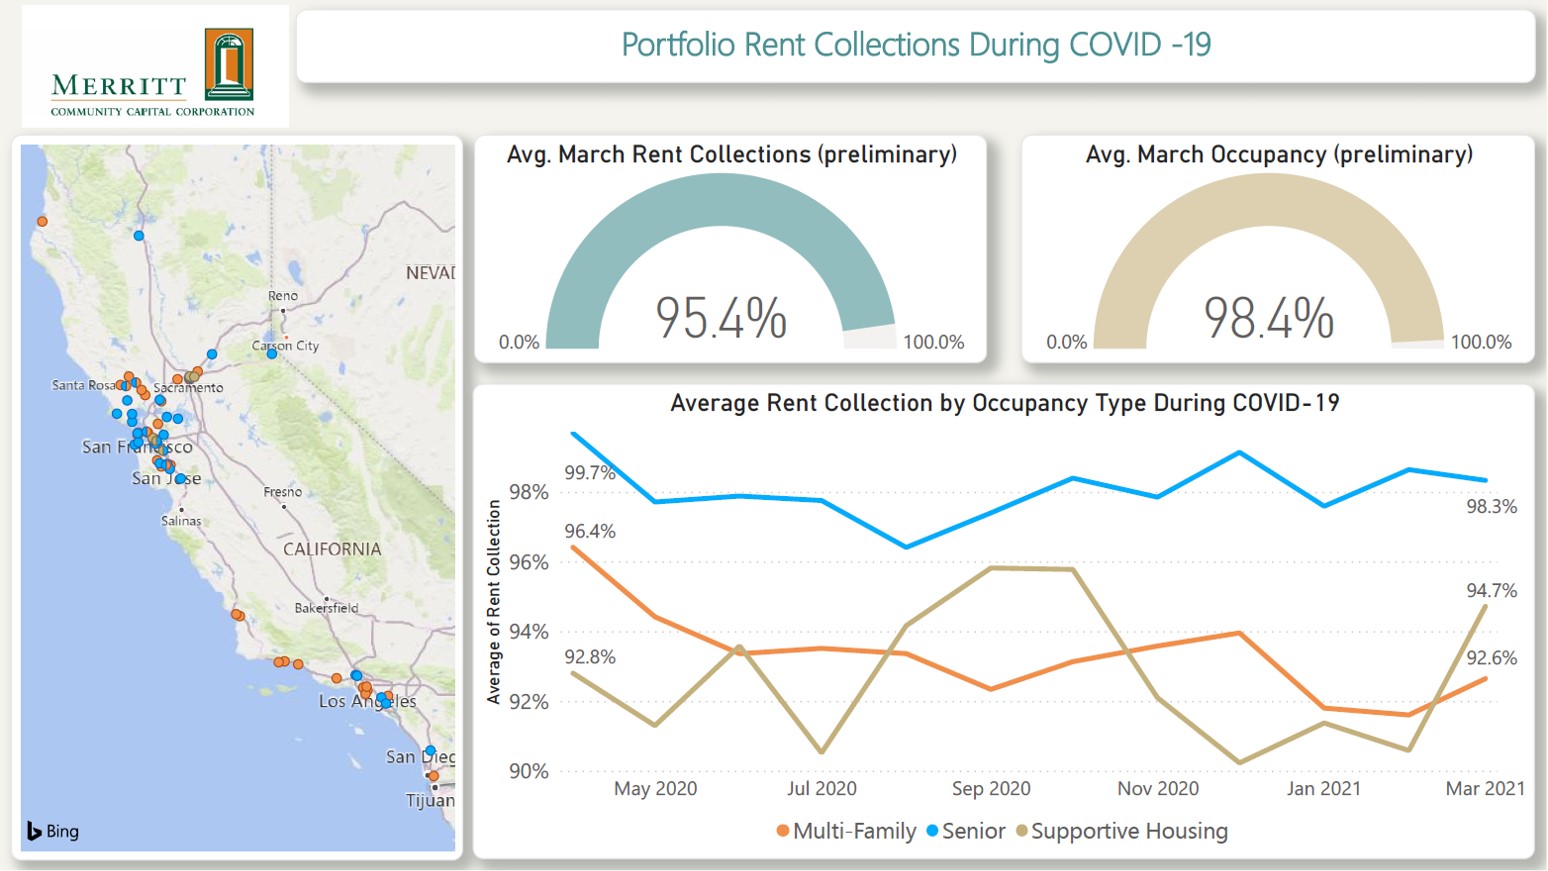 Portfolio Rent Collections During COVID-19 - March 2021 Survey Update